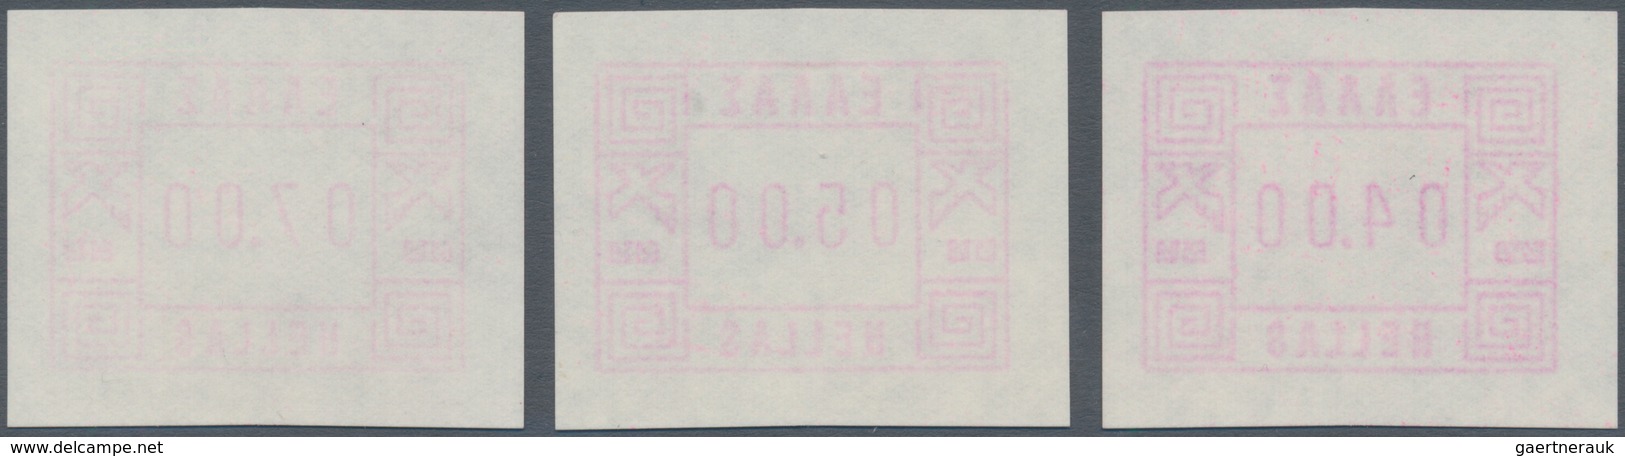 01500 Griechenland: 1979, (ATM Piloting Issue). One Of The Very First ATM Issues In The World That Has Bee - Brieven En Documenten